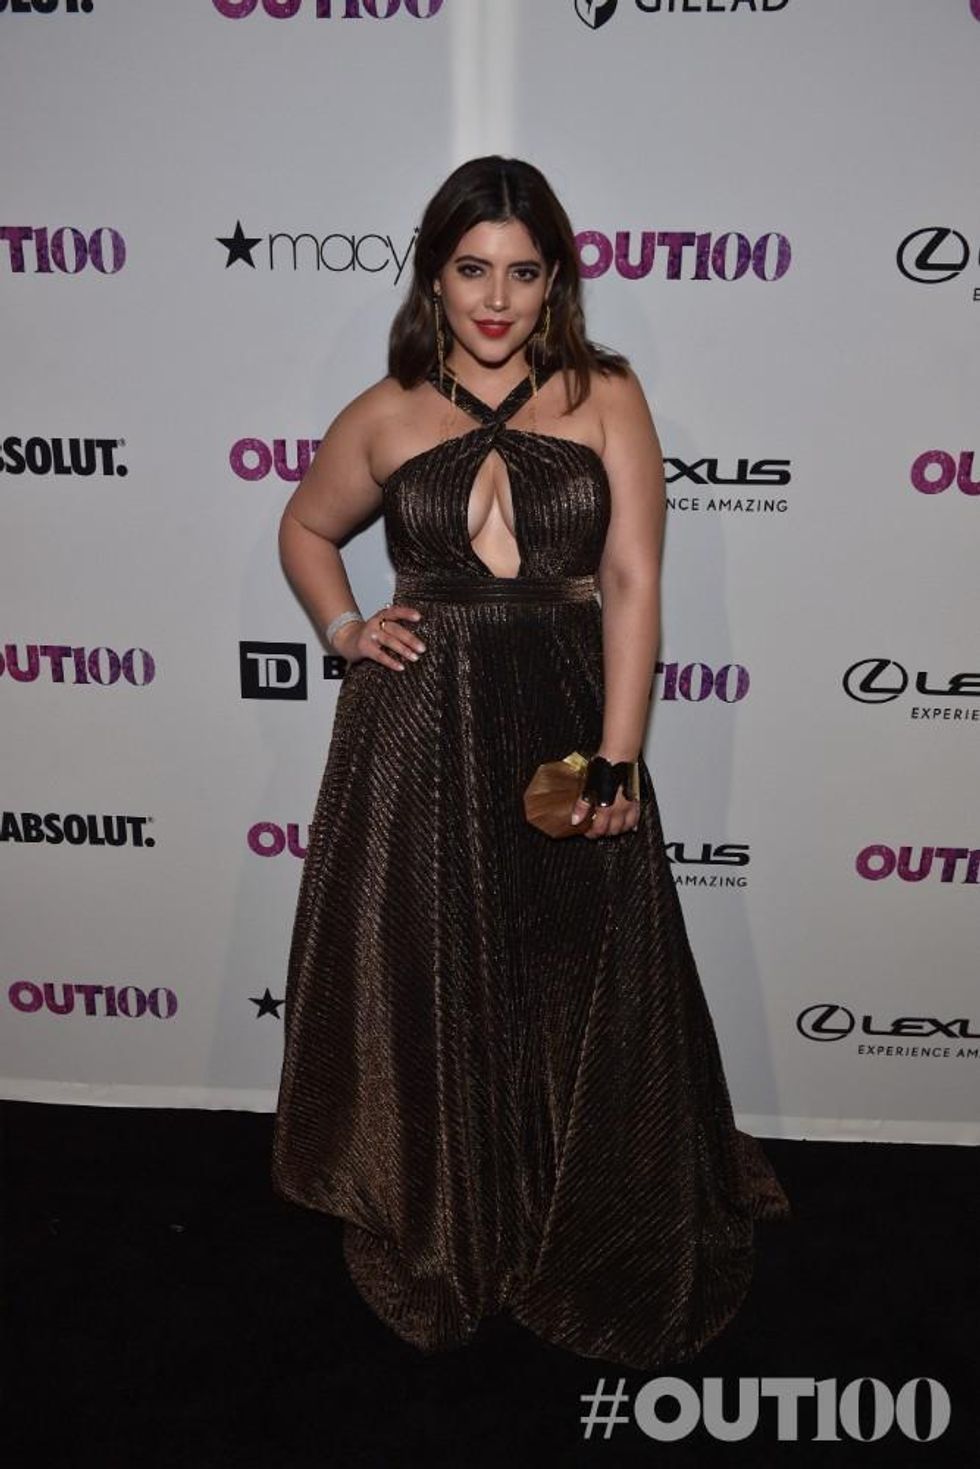 The 2017 OUT100 Gala Red Carpet